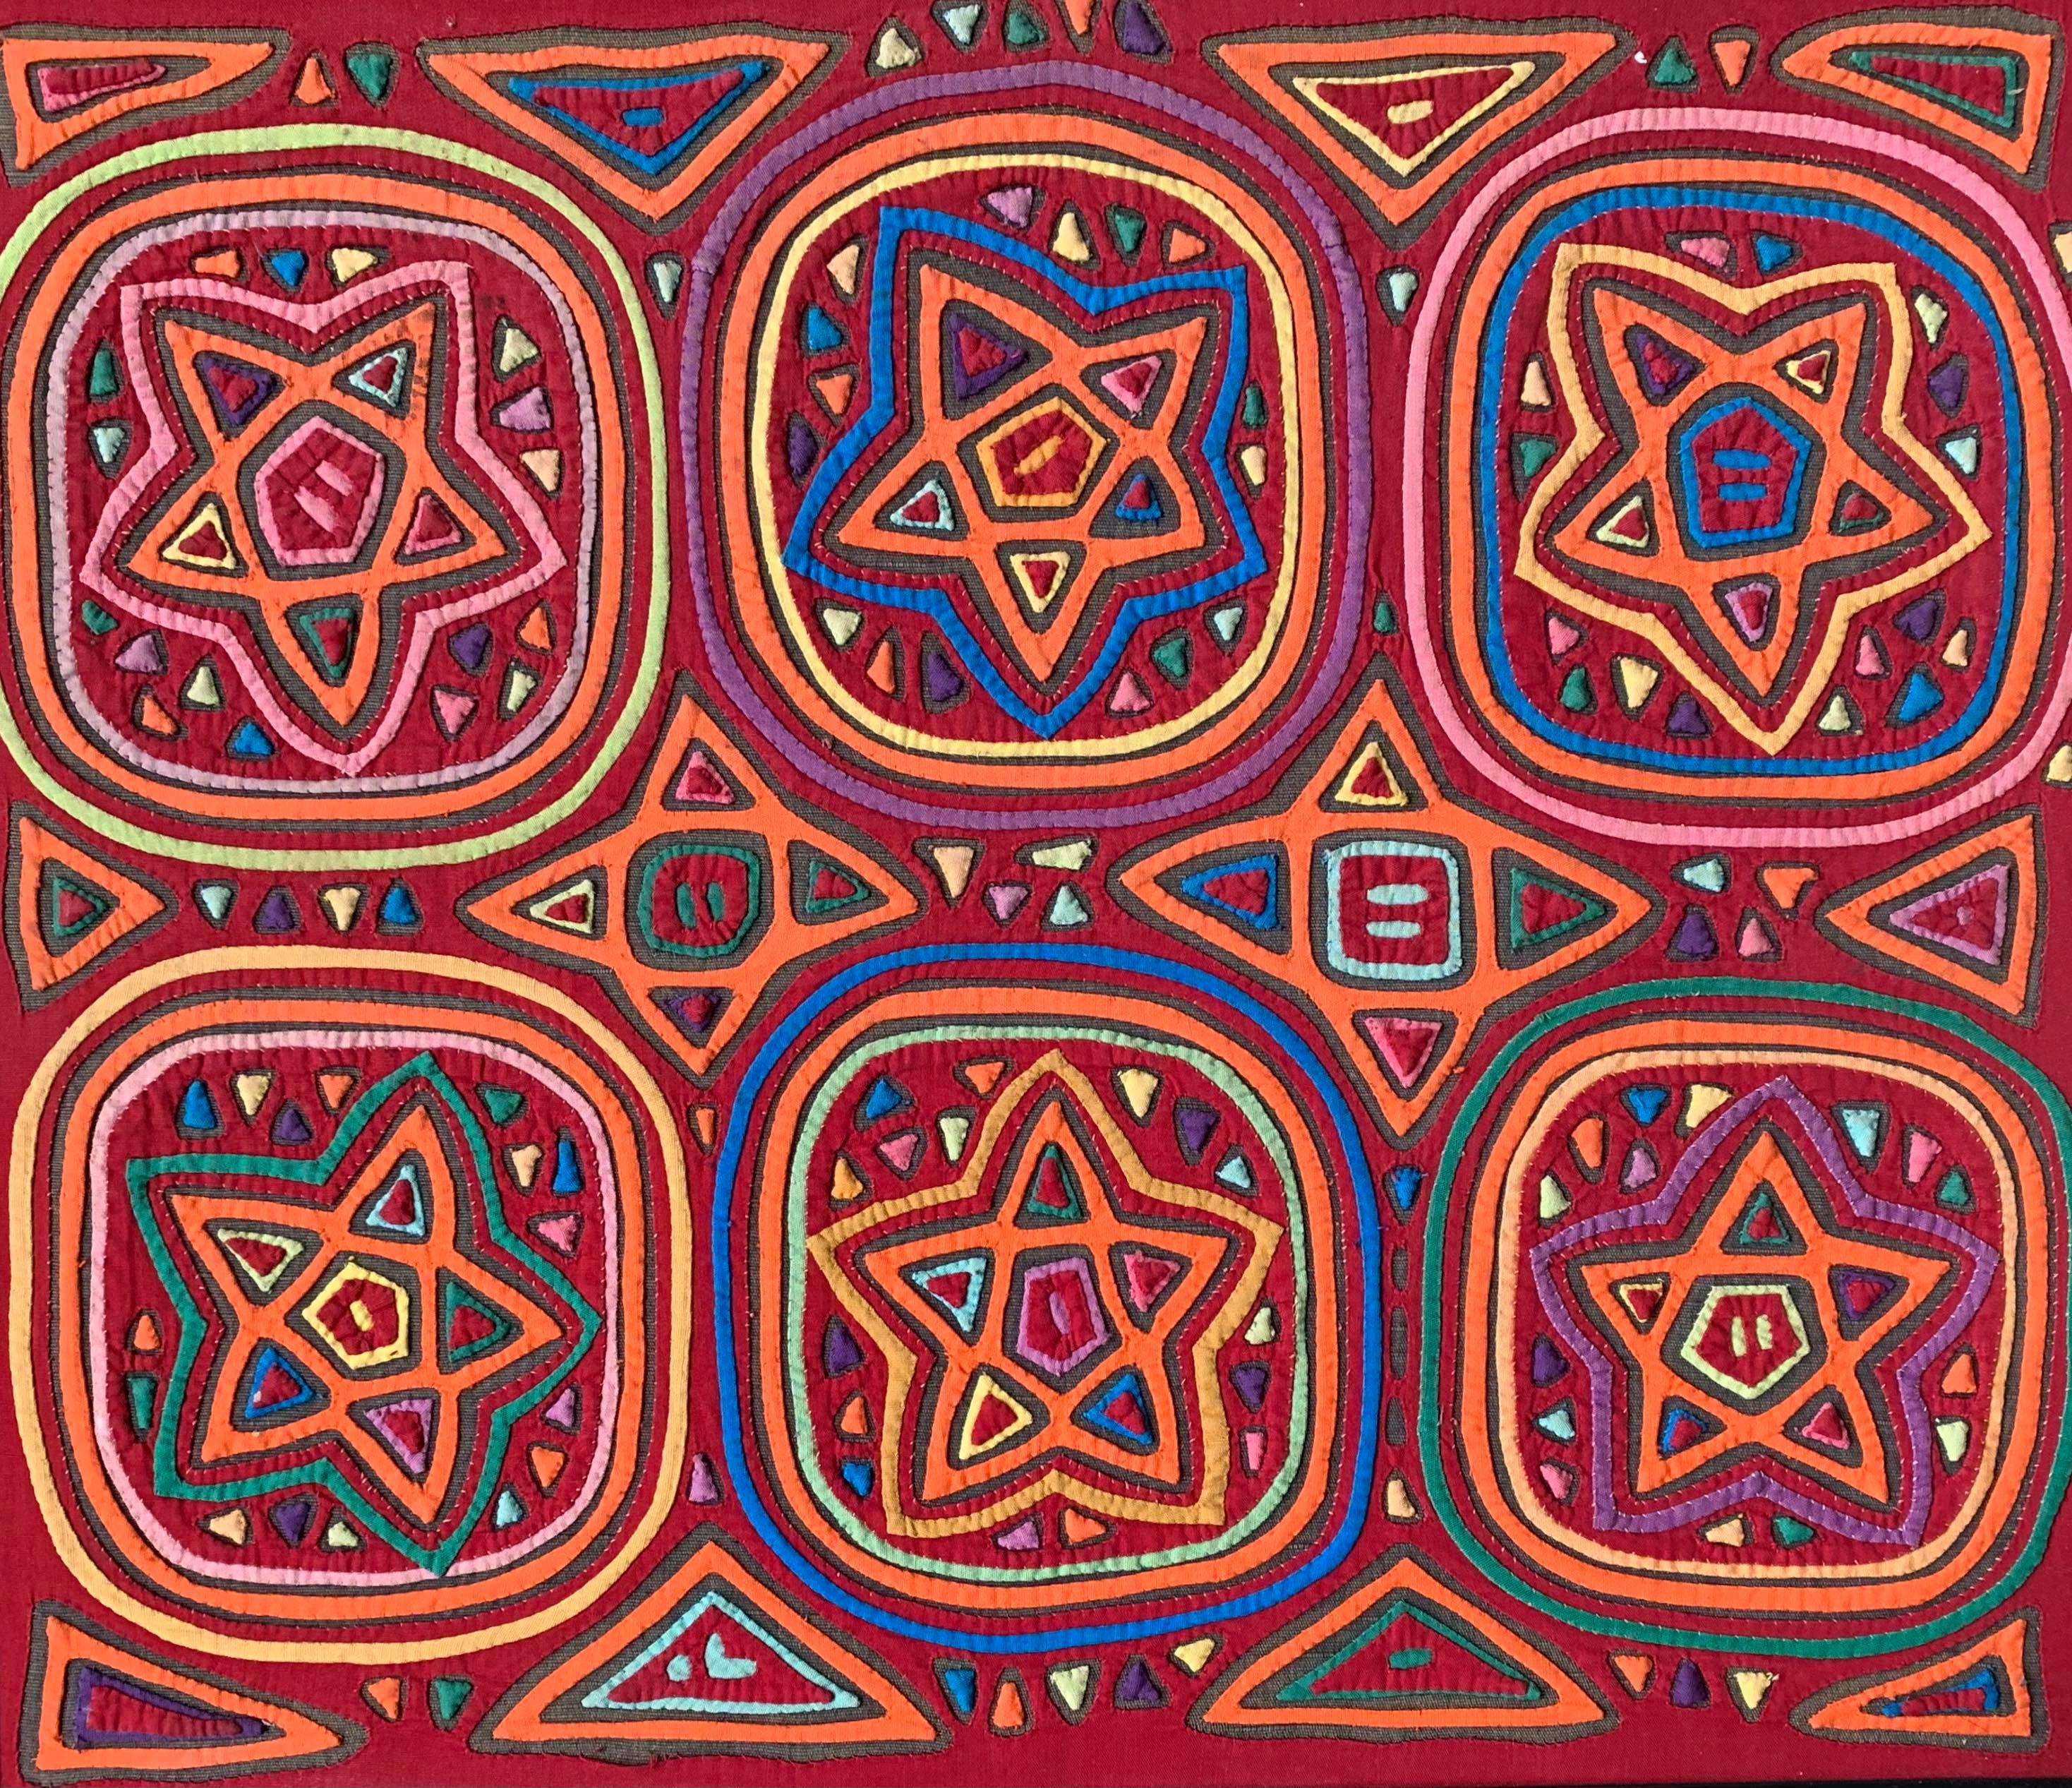 Reverse Applique Fabric Mola Depicting Starfish - Art by Unknown